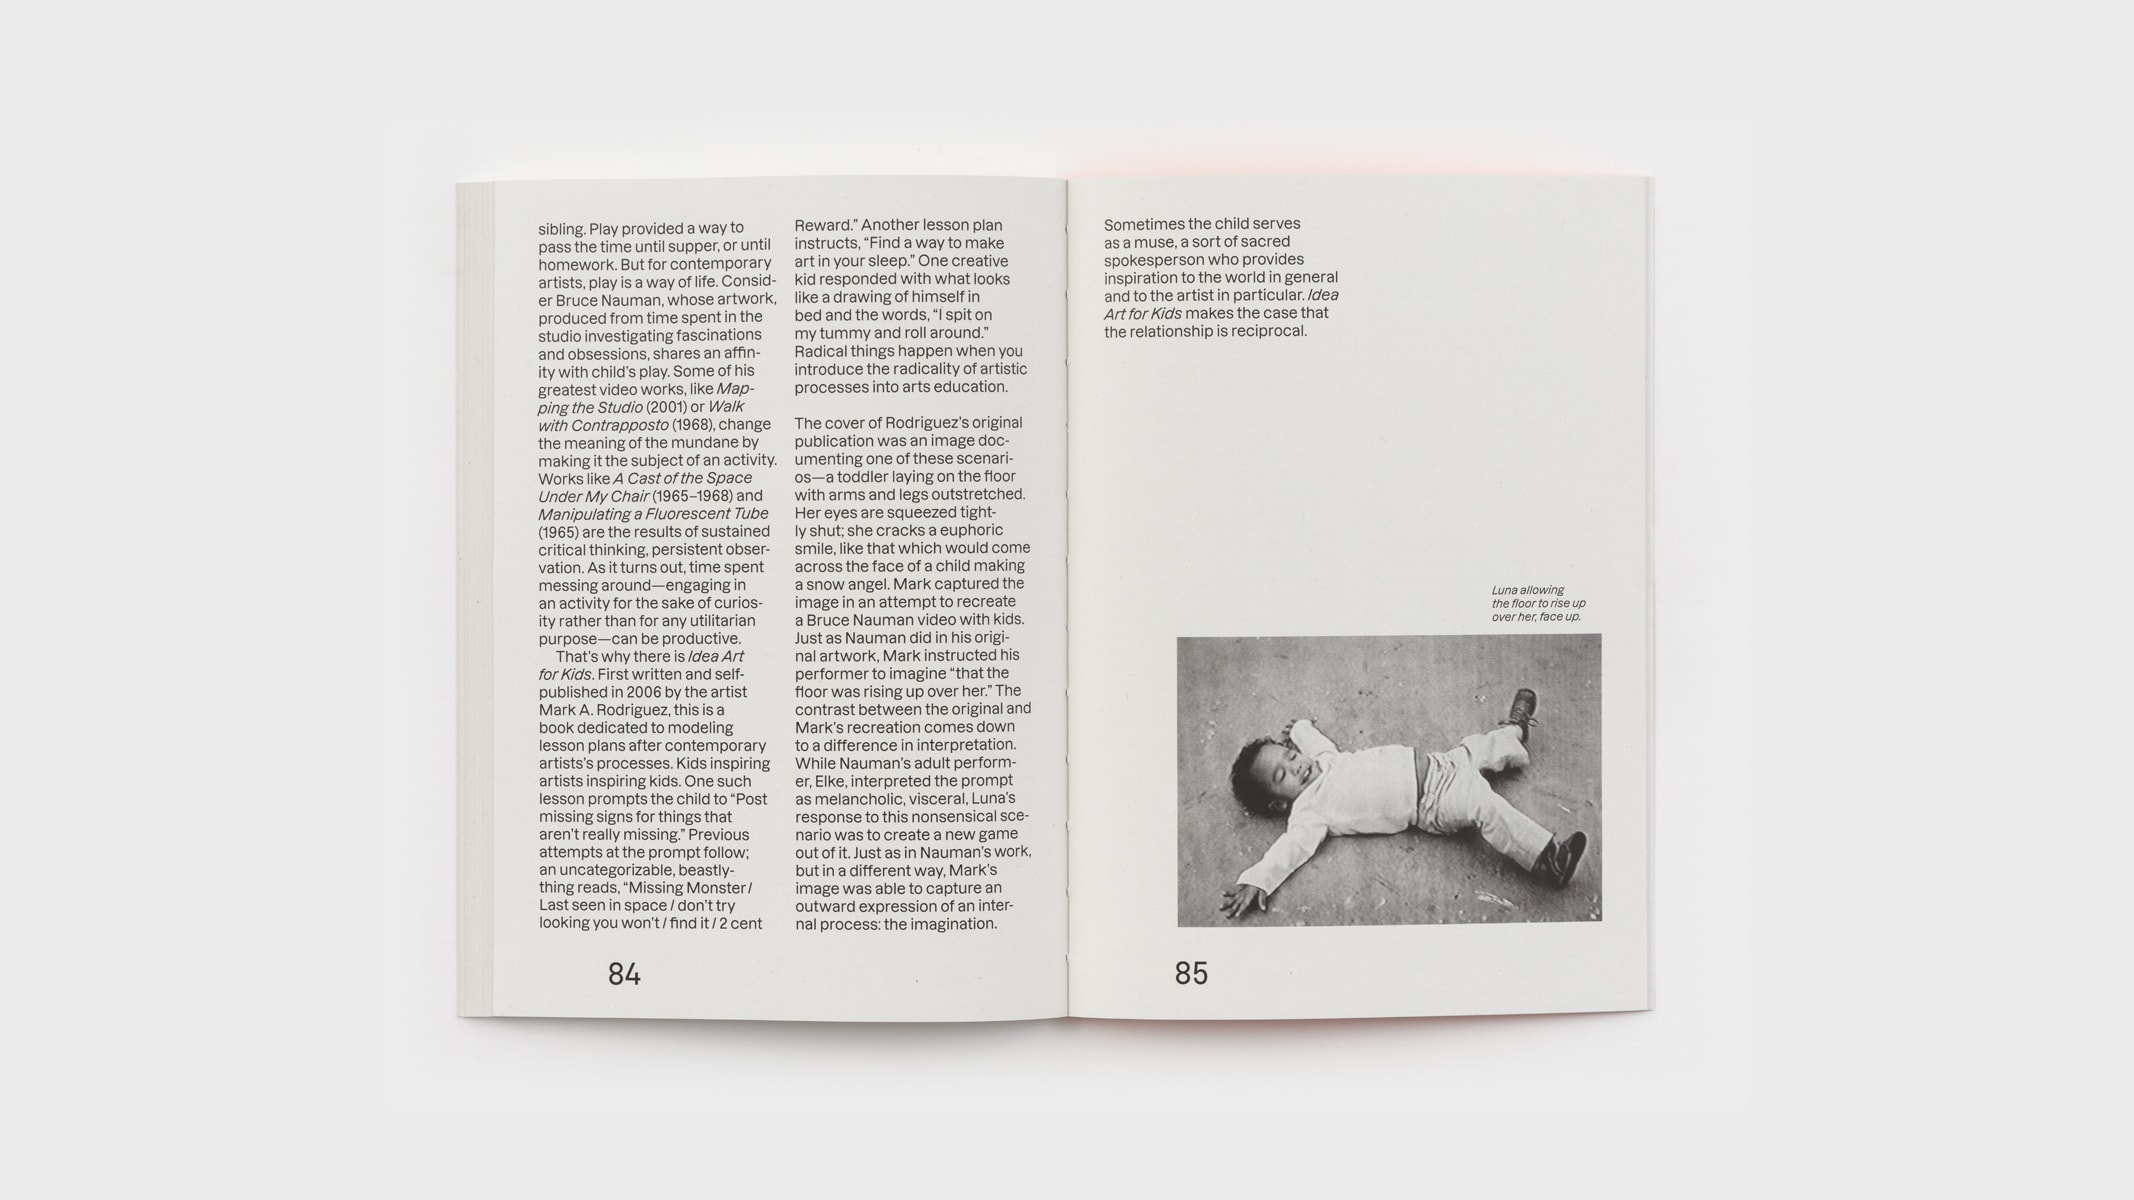 Two pages of Lola Kramer's essay on play, idea art, and children. Like Mark's introduction, it runs across two columns. On the right page is a black and white image of a young girl, Luna, prone on the ground like a snow angel.